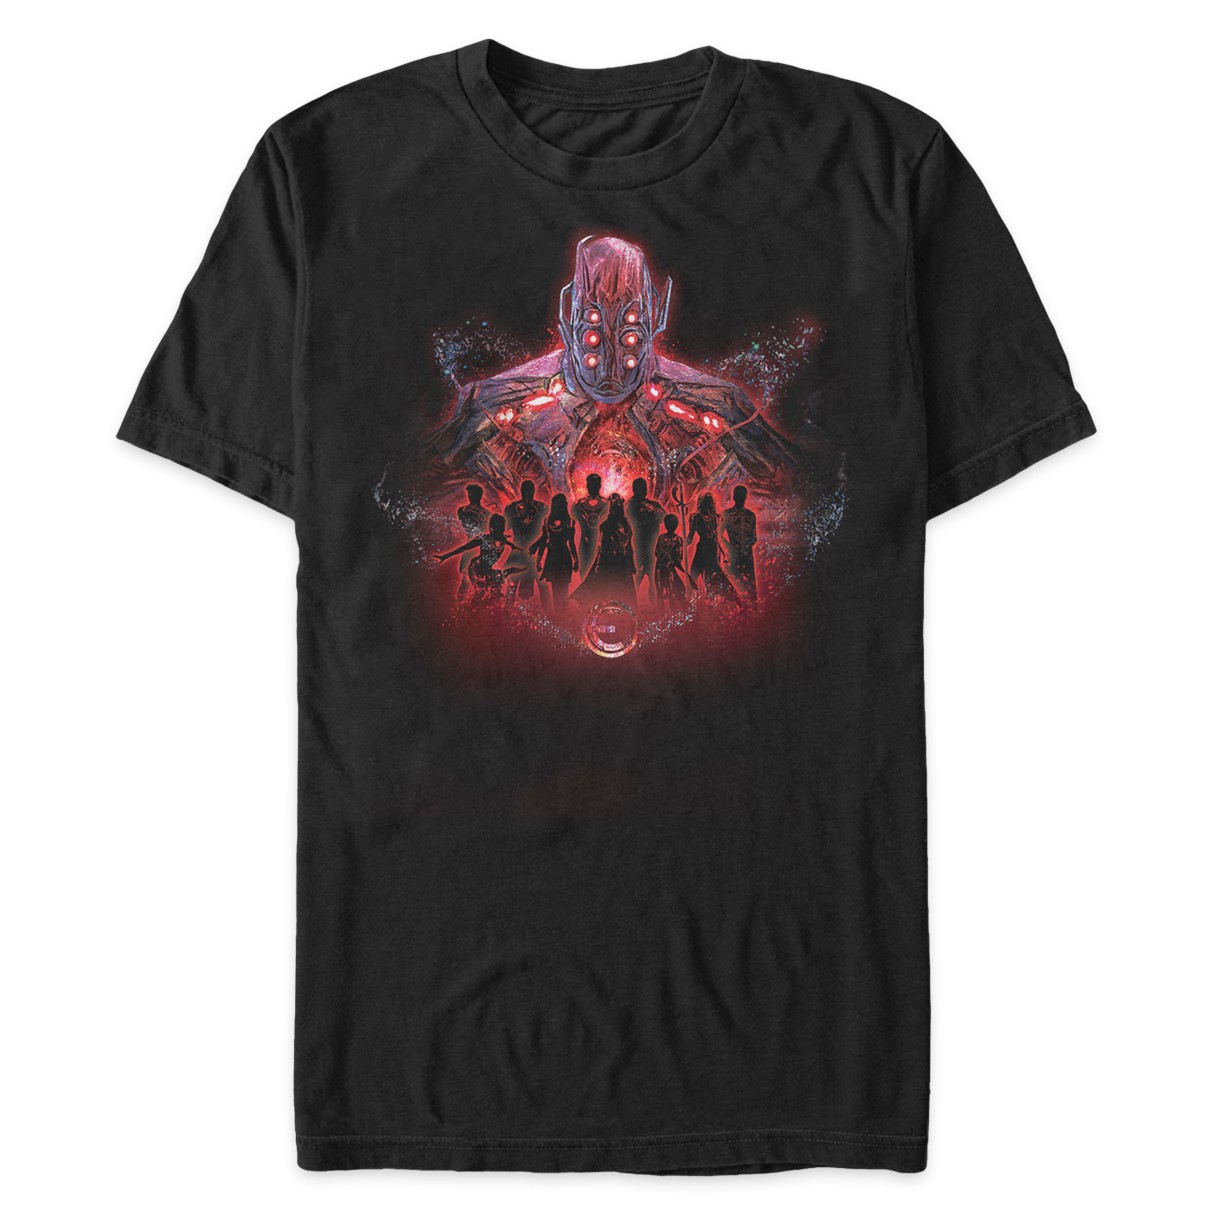 Eternals Silhouettes T-Shirt for Adults